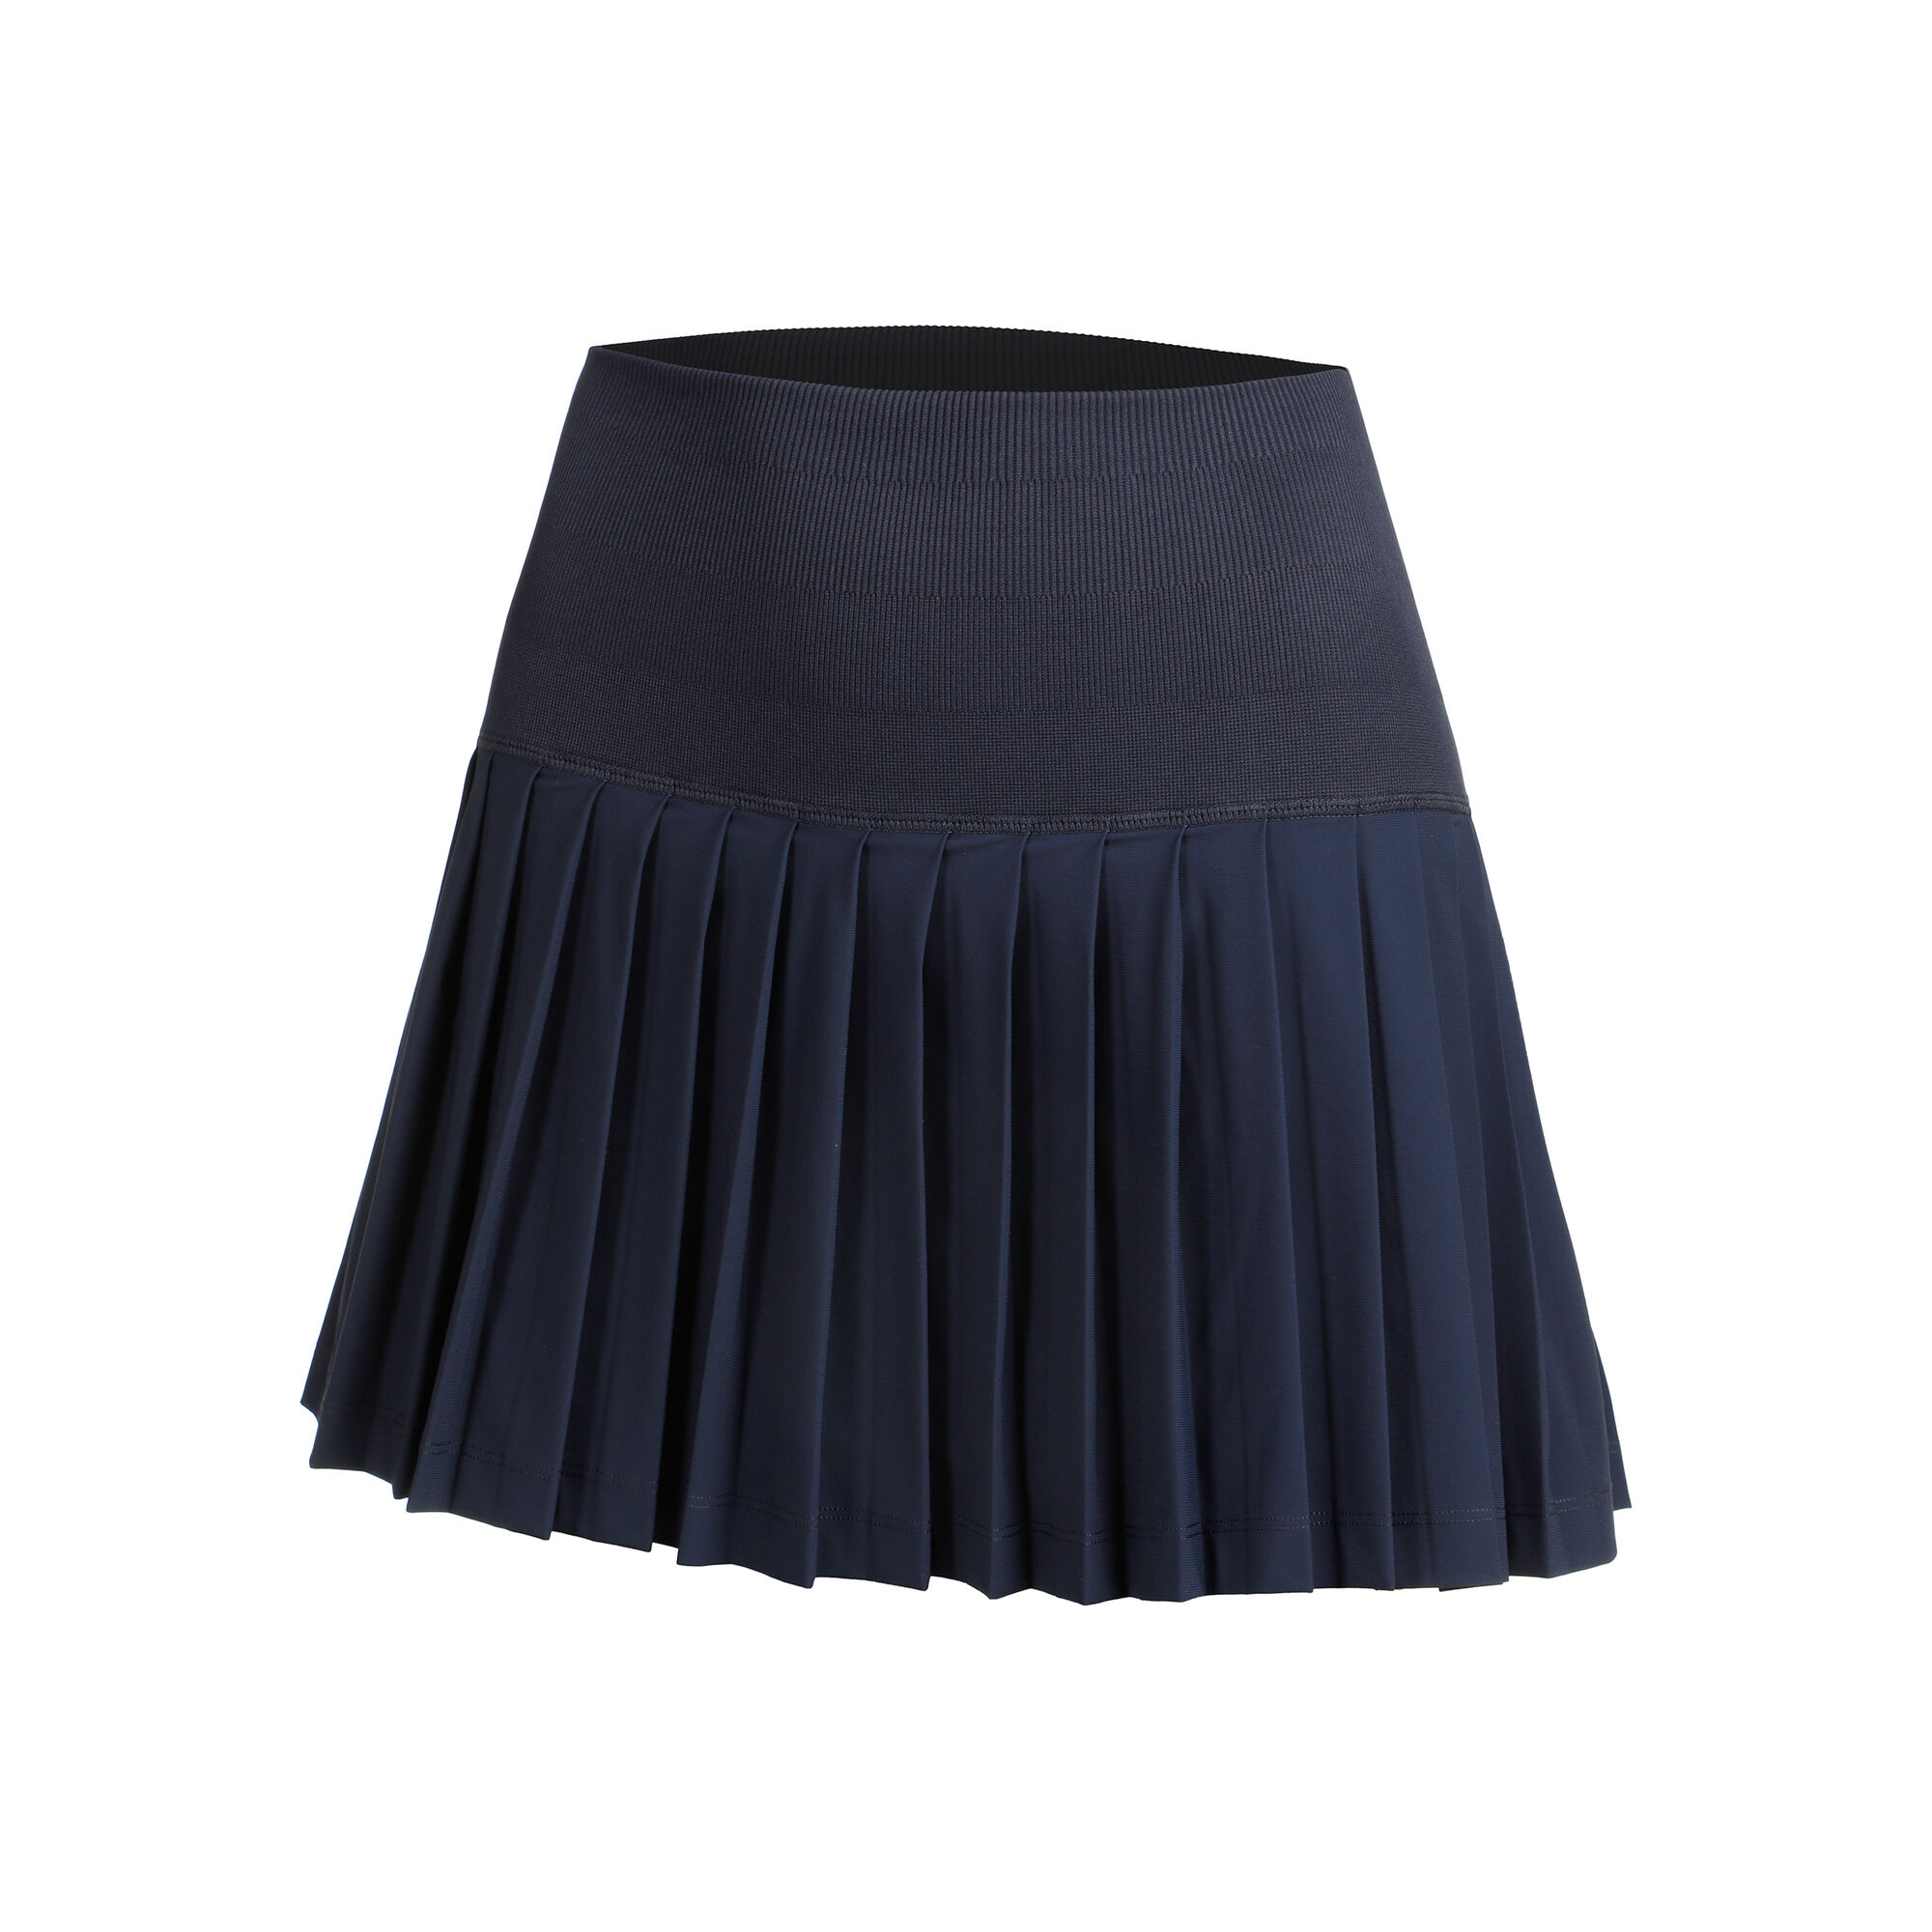 Buy Women Navy Blue Ankle Length Sports Lower With Pockets Online - Global  Republic